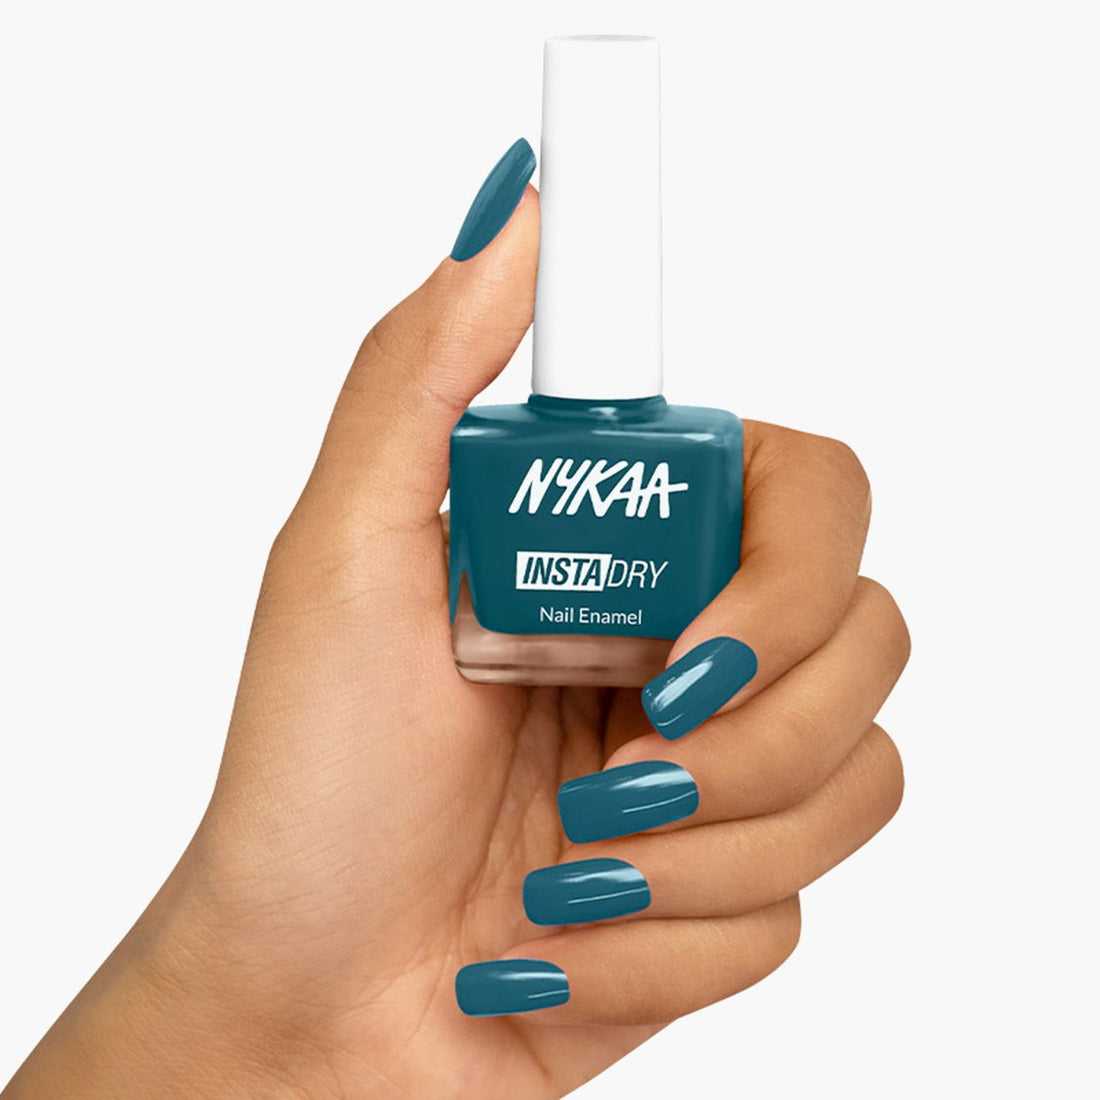 Nykaa Cosmetics - NEW-D nails, who dis? 📞 💅🏻 Absolutely... | Facebook